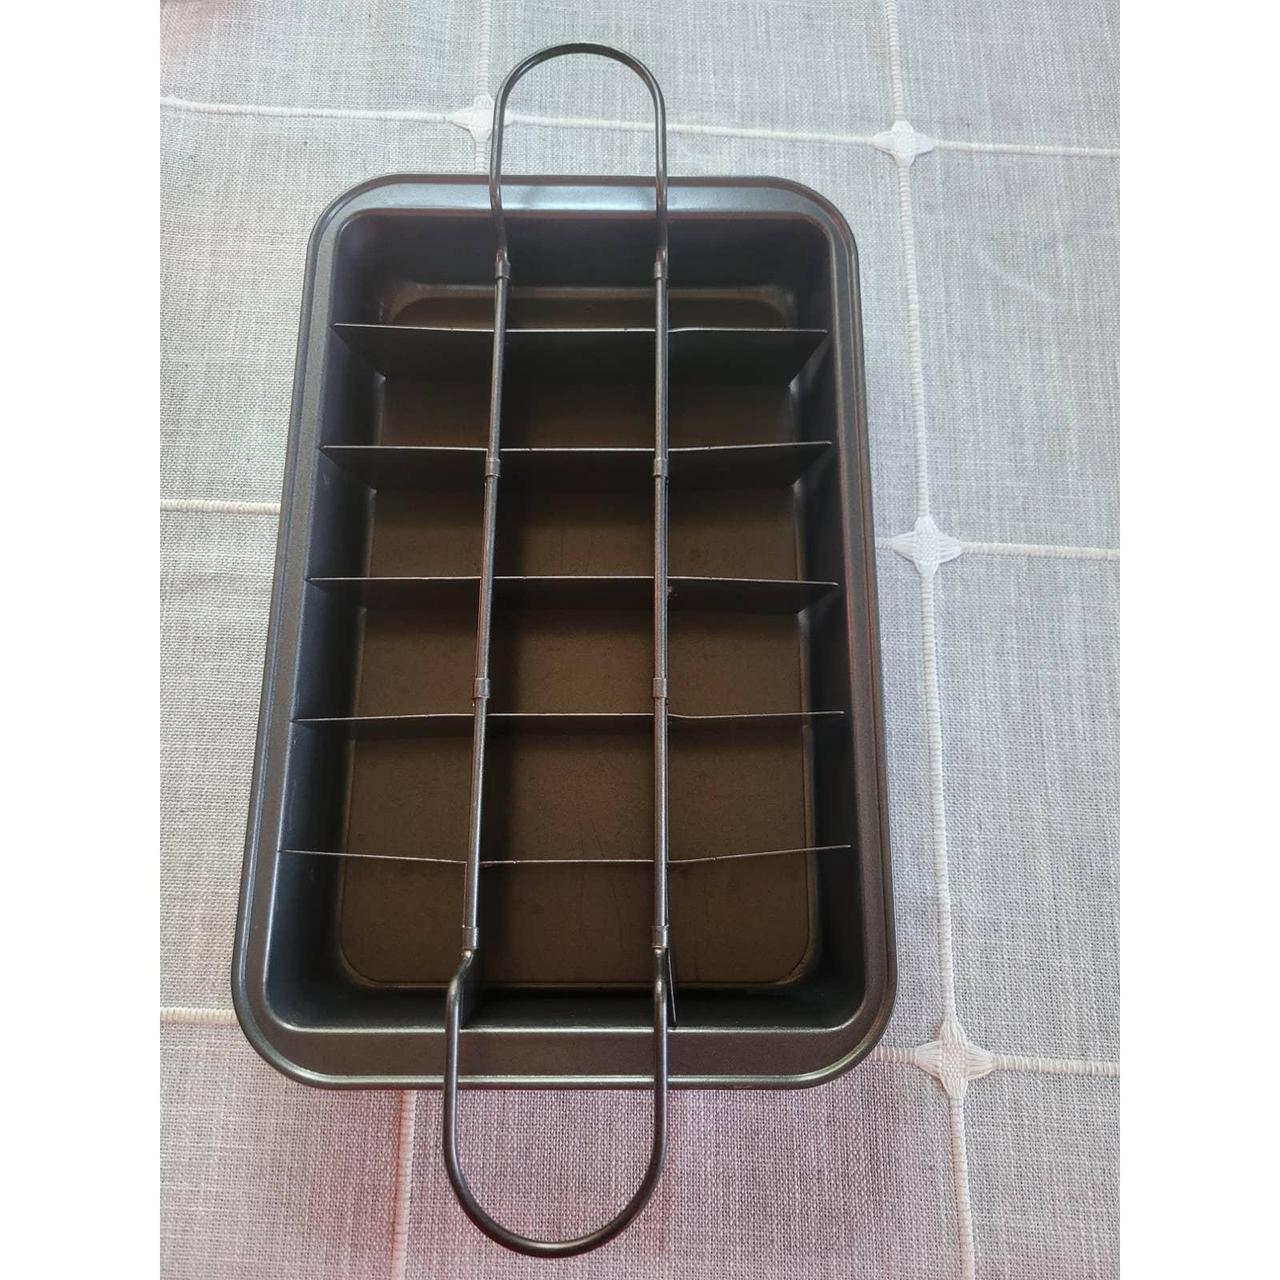 Brownie Pan 8x12 Lift & Serve Perfectly Sectioned - Depop